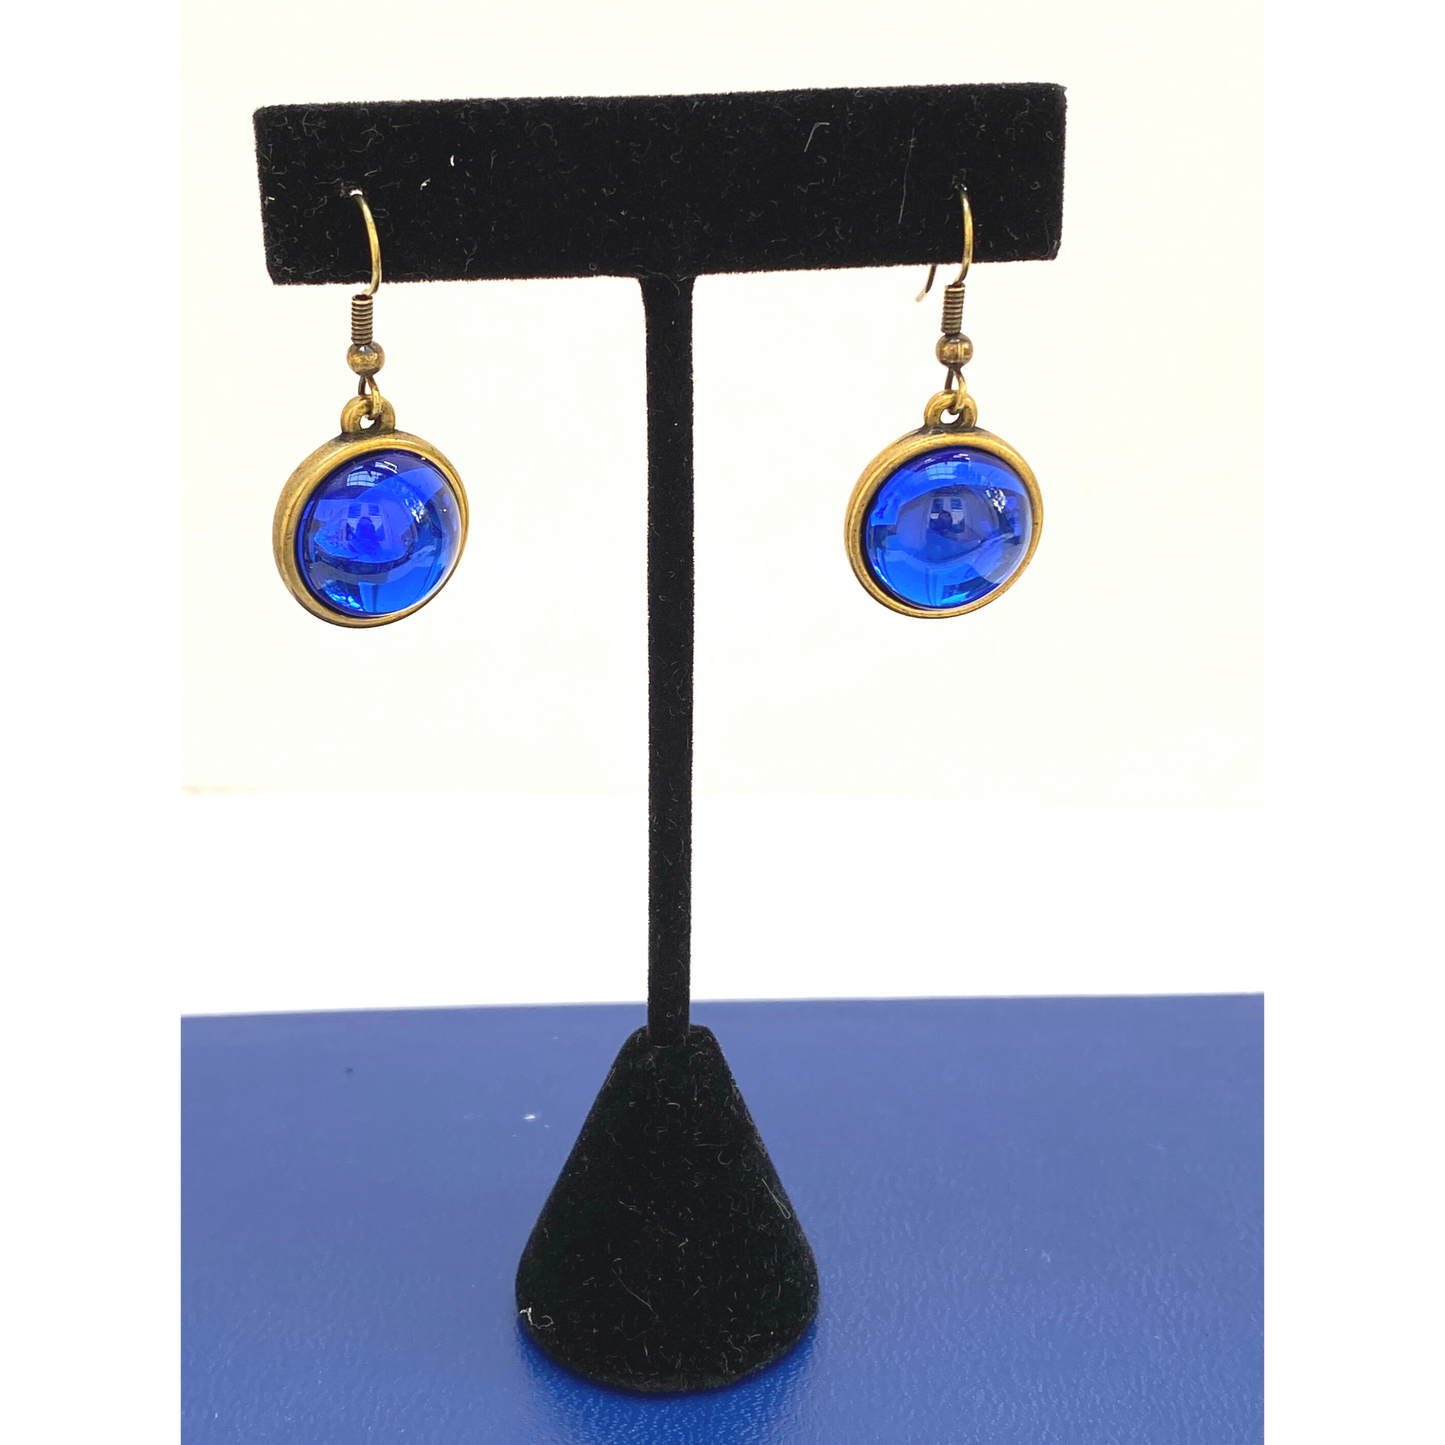 Earring, Iridescent cobalt blue, Antique Gold, French Ear Wire, Handmade in USA